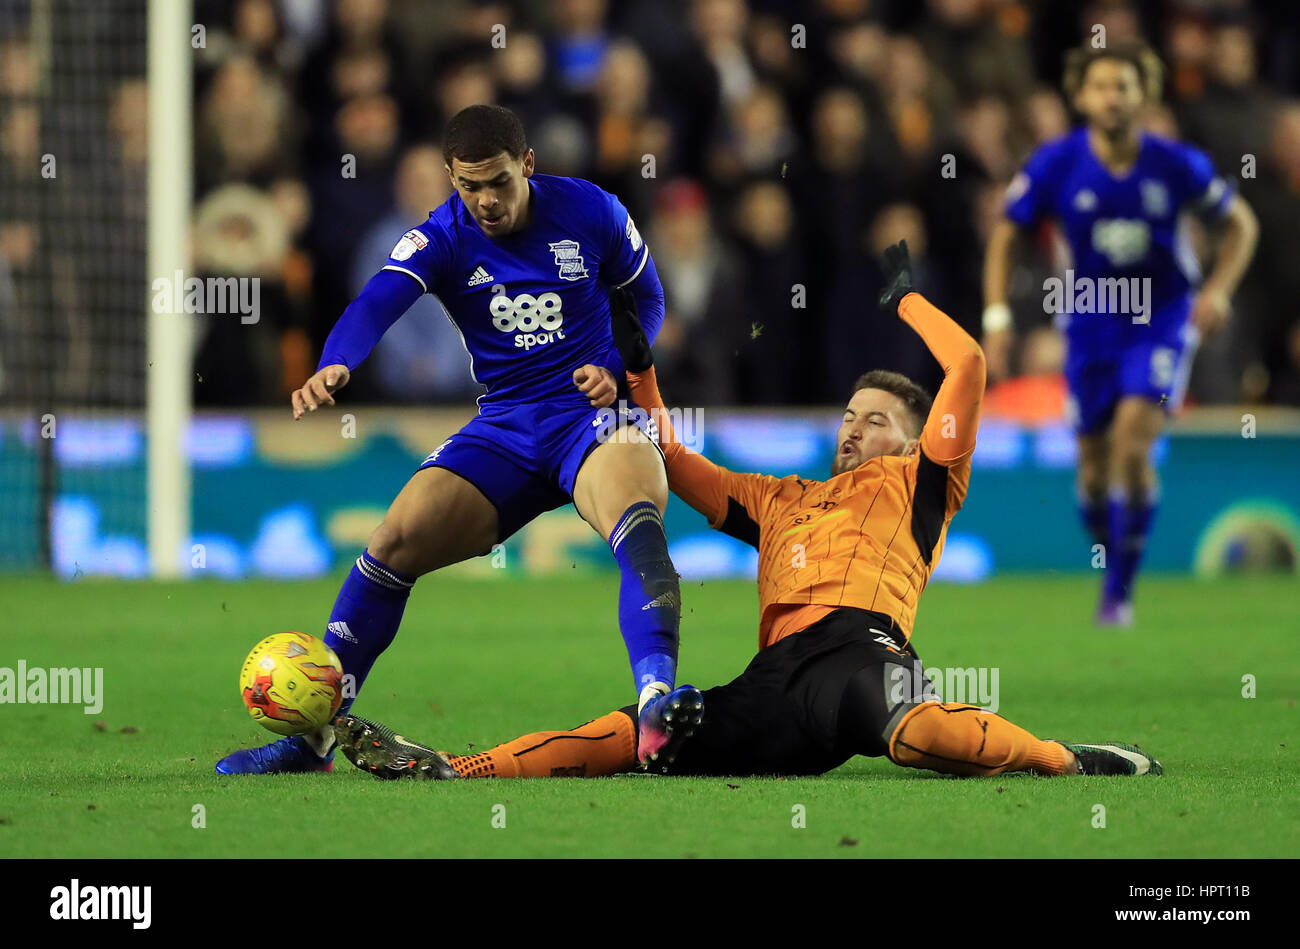 Birmingham City's Che Adams (left) and Wolverhampton Wanderers' Matt Doherty battle for the ball during the Sky Bet Championship match at Molineux, Wolverhampton. Stock Photo